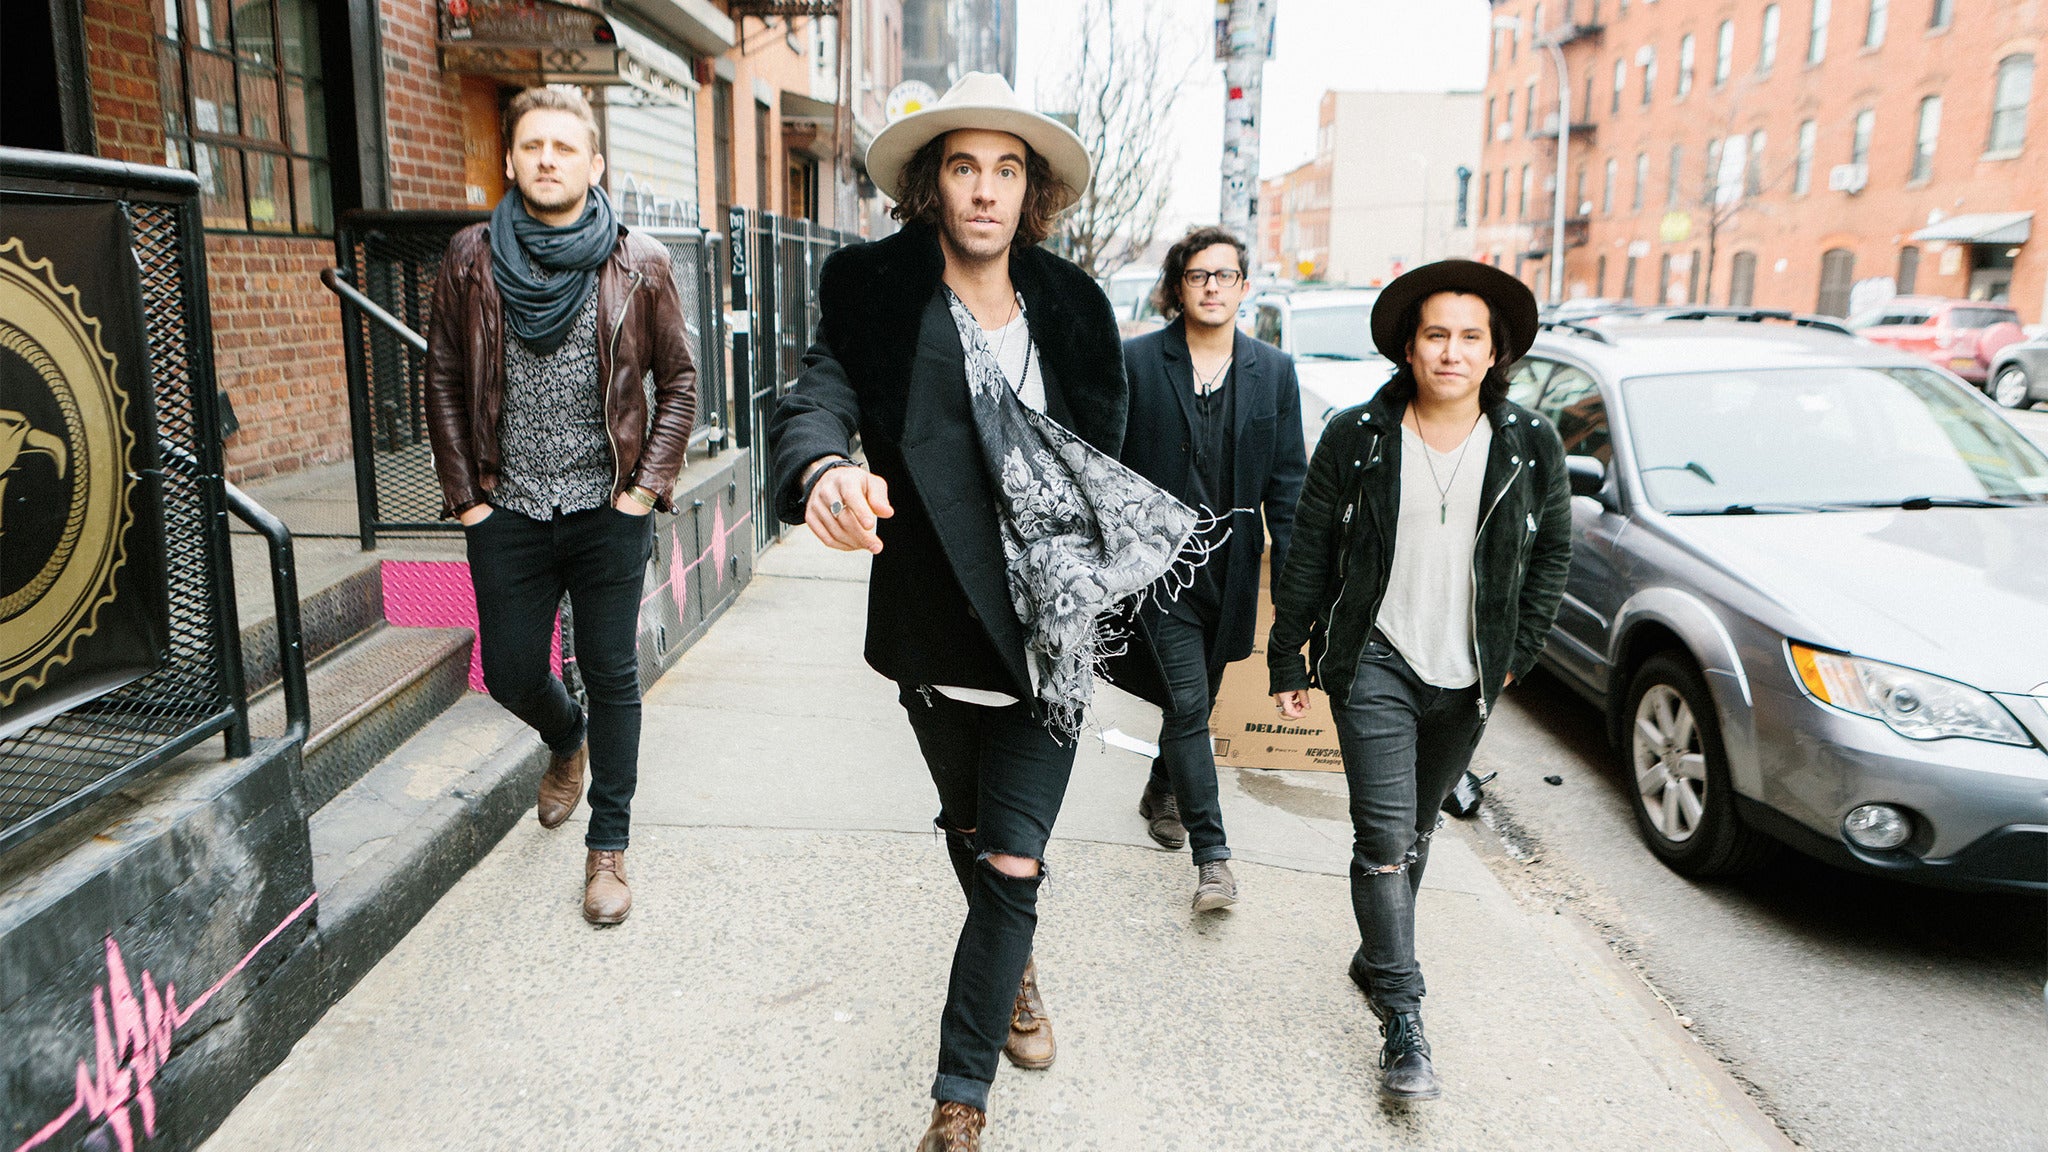 AMERICAN AUTHORS & MAGIC GIANT Band of Brothers Road Show in Minneapolis promo photo for Spotify presale offer code